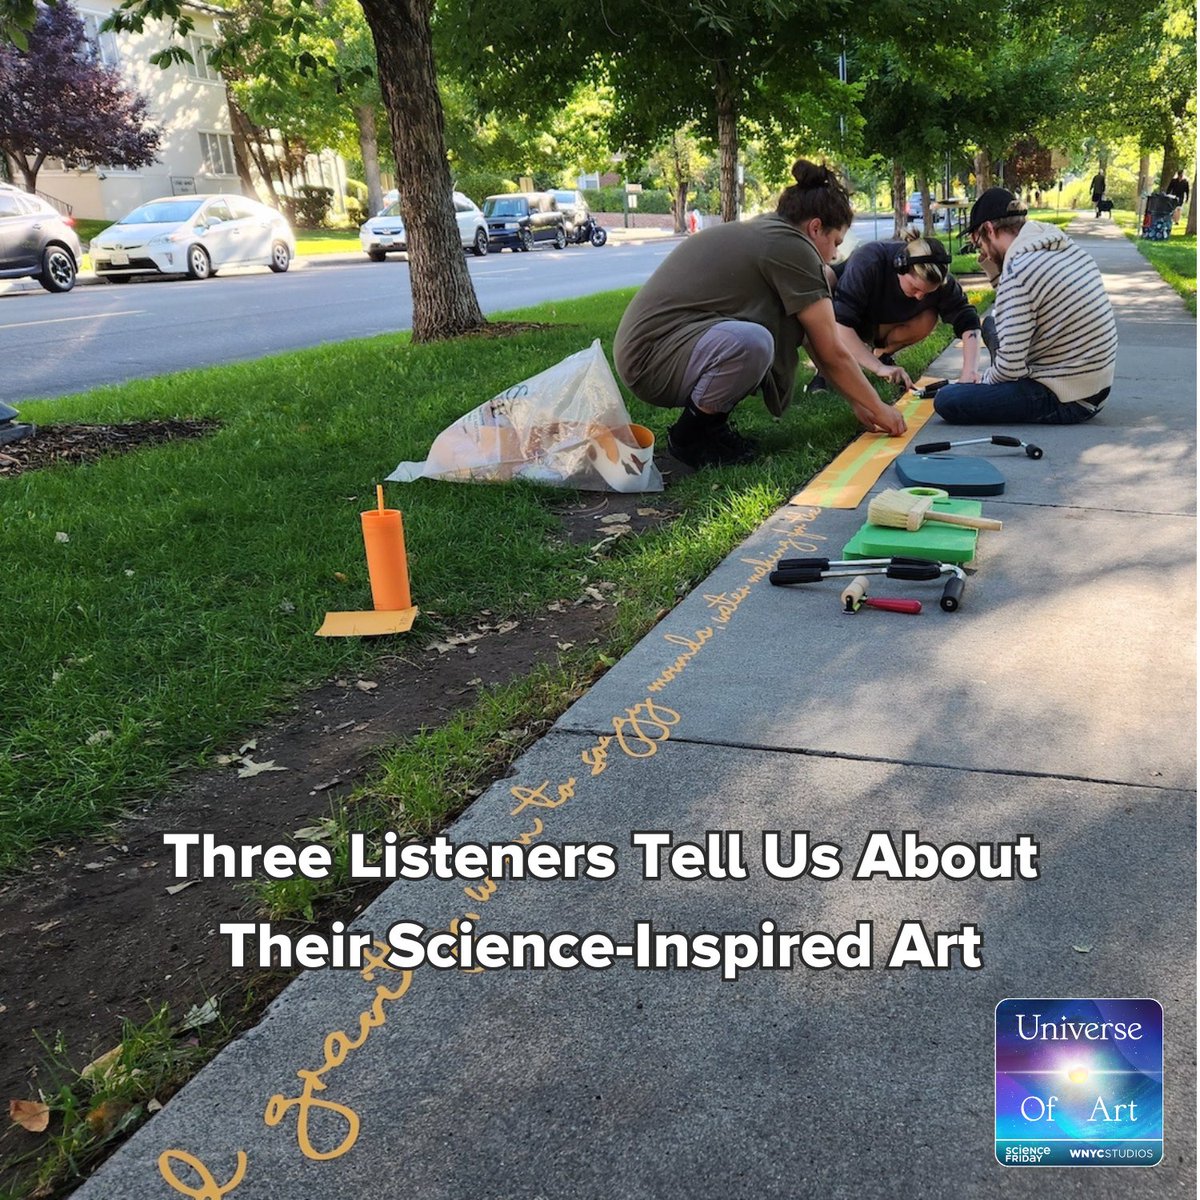 In the latest episode of Universe of Art, we celebrate our first birthday with three listeners who share their science-inspired poems, sound art, and collages.

Listen here 🎧: pod.link/1680530900